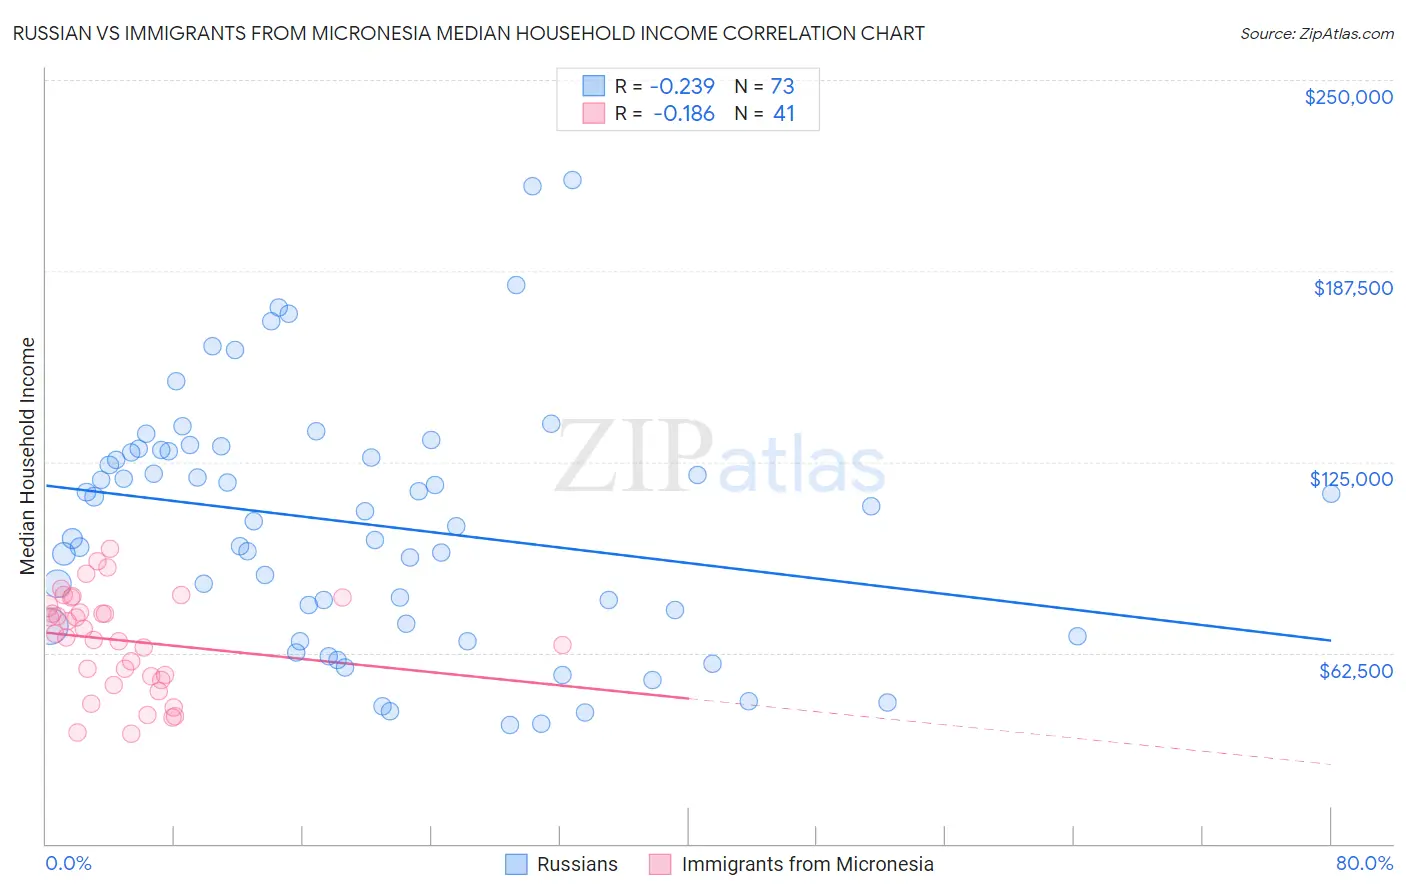 Russian vs Immigrants from Micronesia Median Household Income